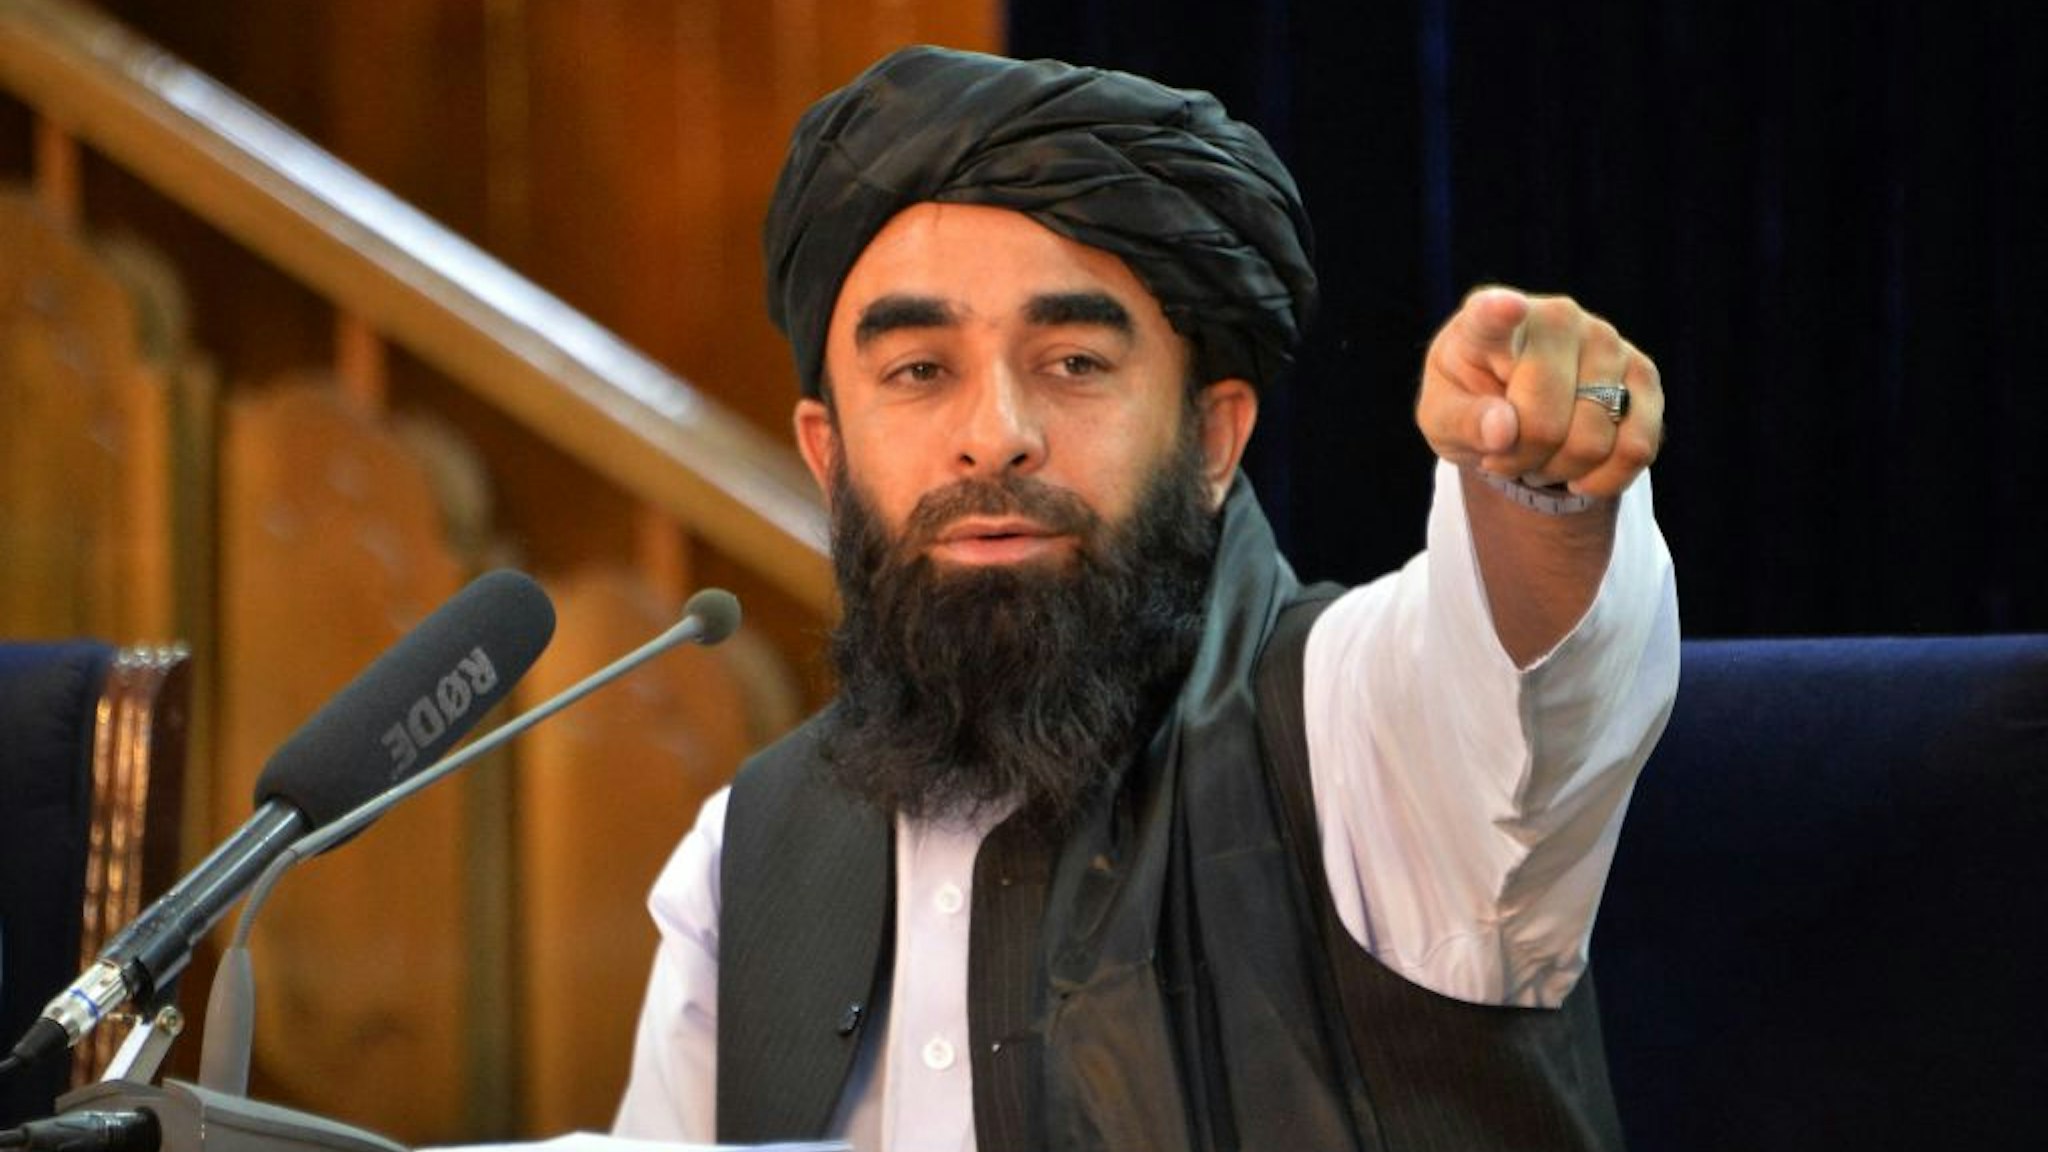 TOPSHOT - Taliban spokesperson Zabihullah Mujahid gestures during a press conference in Kabul on August 24, 2021 after the Taliban stunning takeover of Afghanistan. (Photo by Hoshang Hashimi / AFP) (Photo by HOSHANG HASHIMI/AFP via Getty Images)